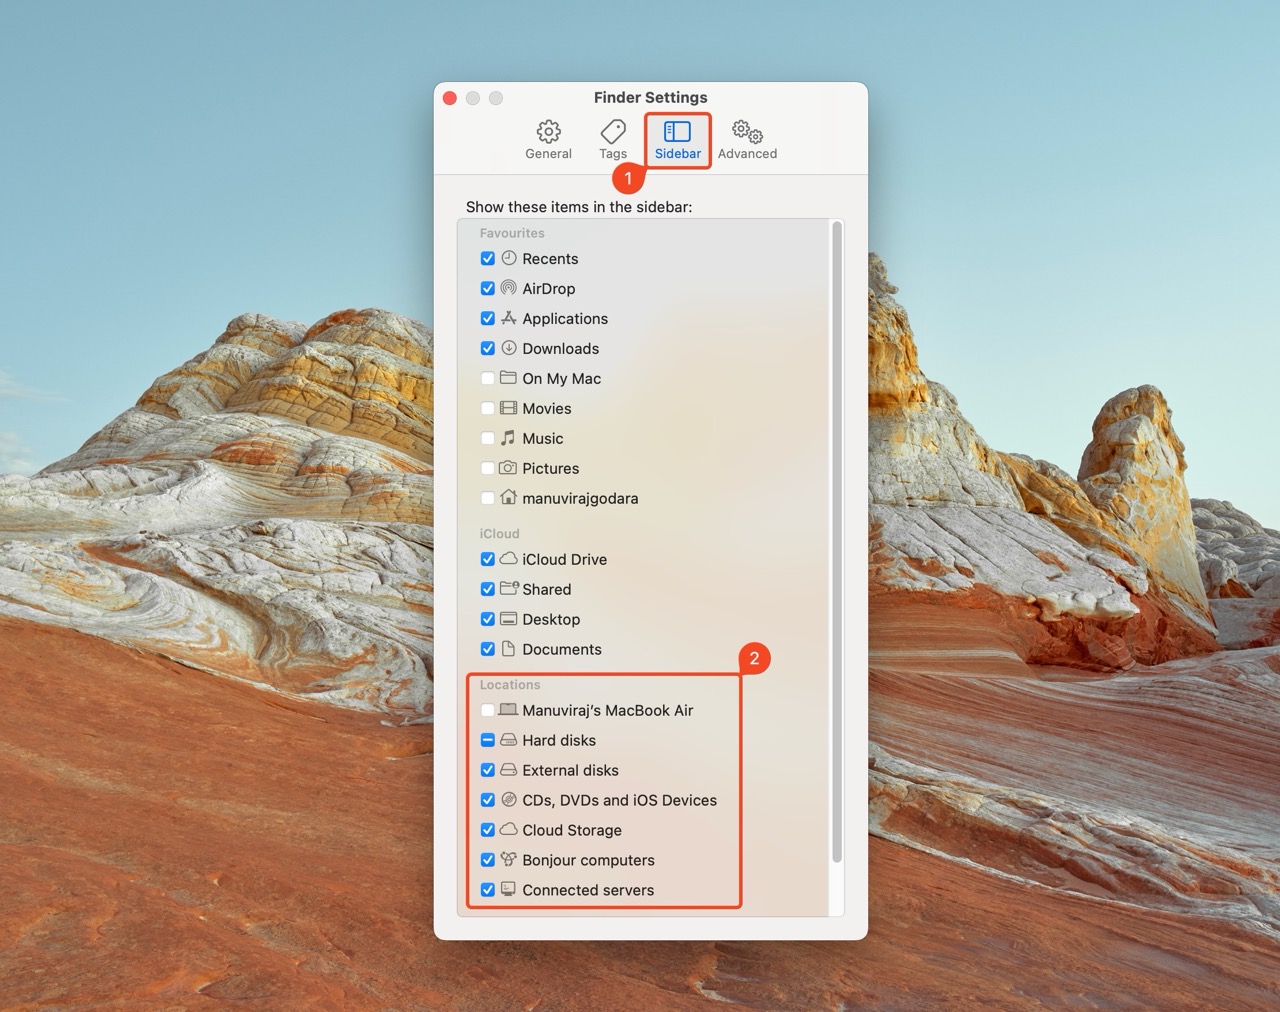 Screenshot of Finder Preferences window in macOS, 'Sidebar' tab selected, showing various locations including 'External disks' checked to appear in the sidebar.